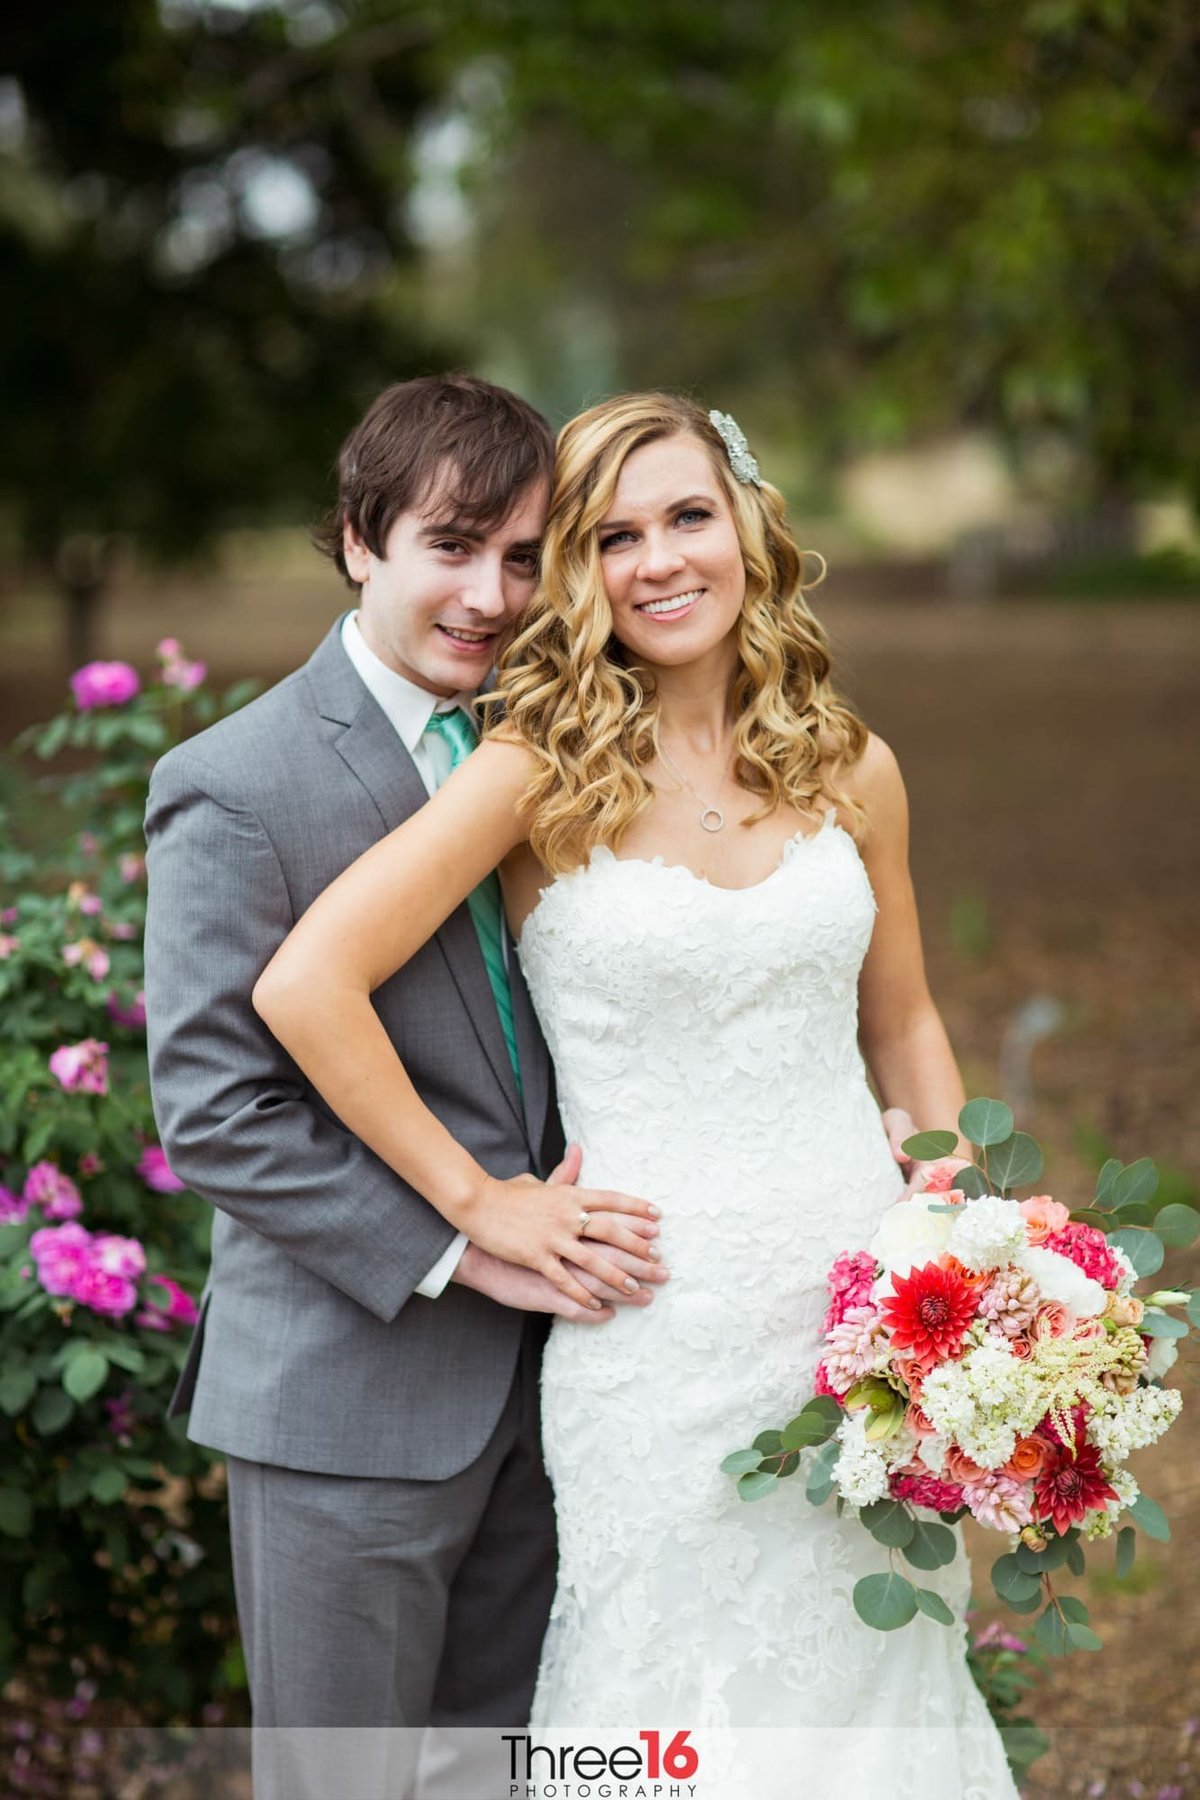 Bride and Groom pose for photos with his hand on her hip